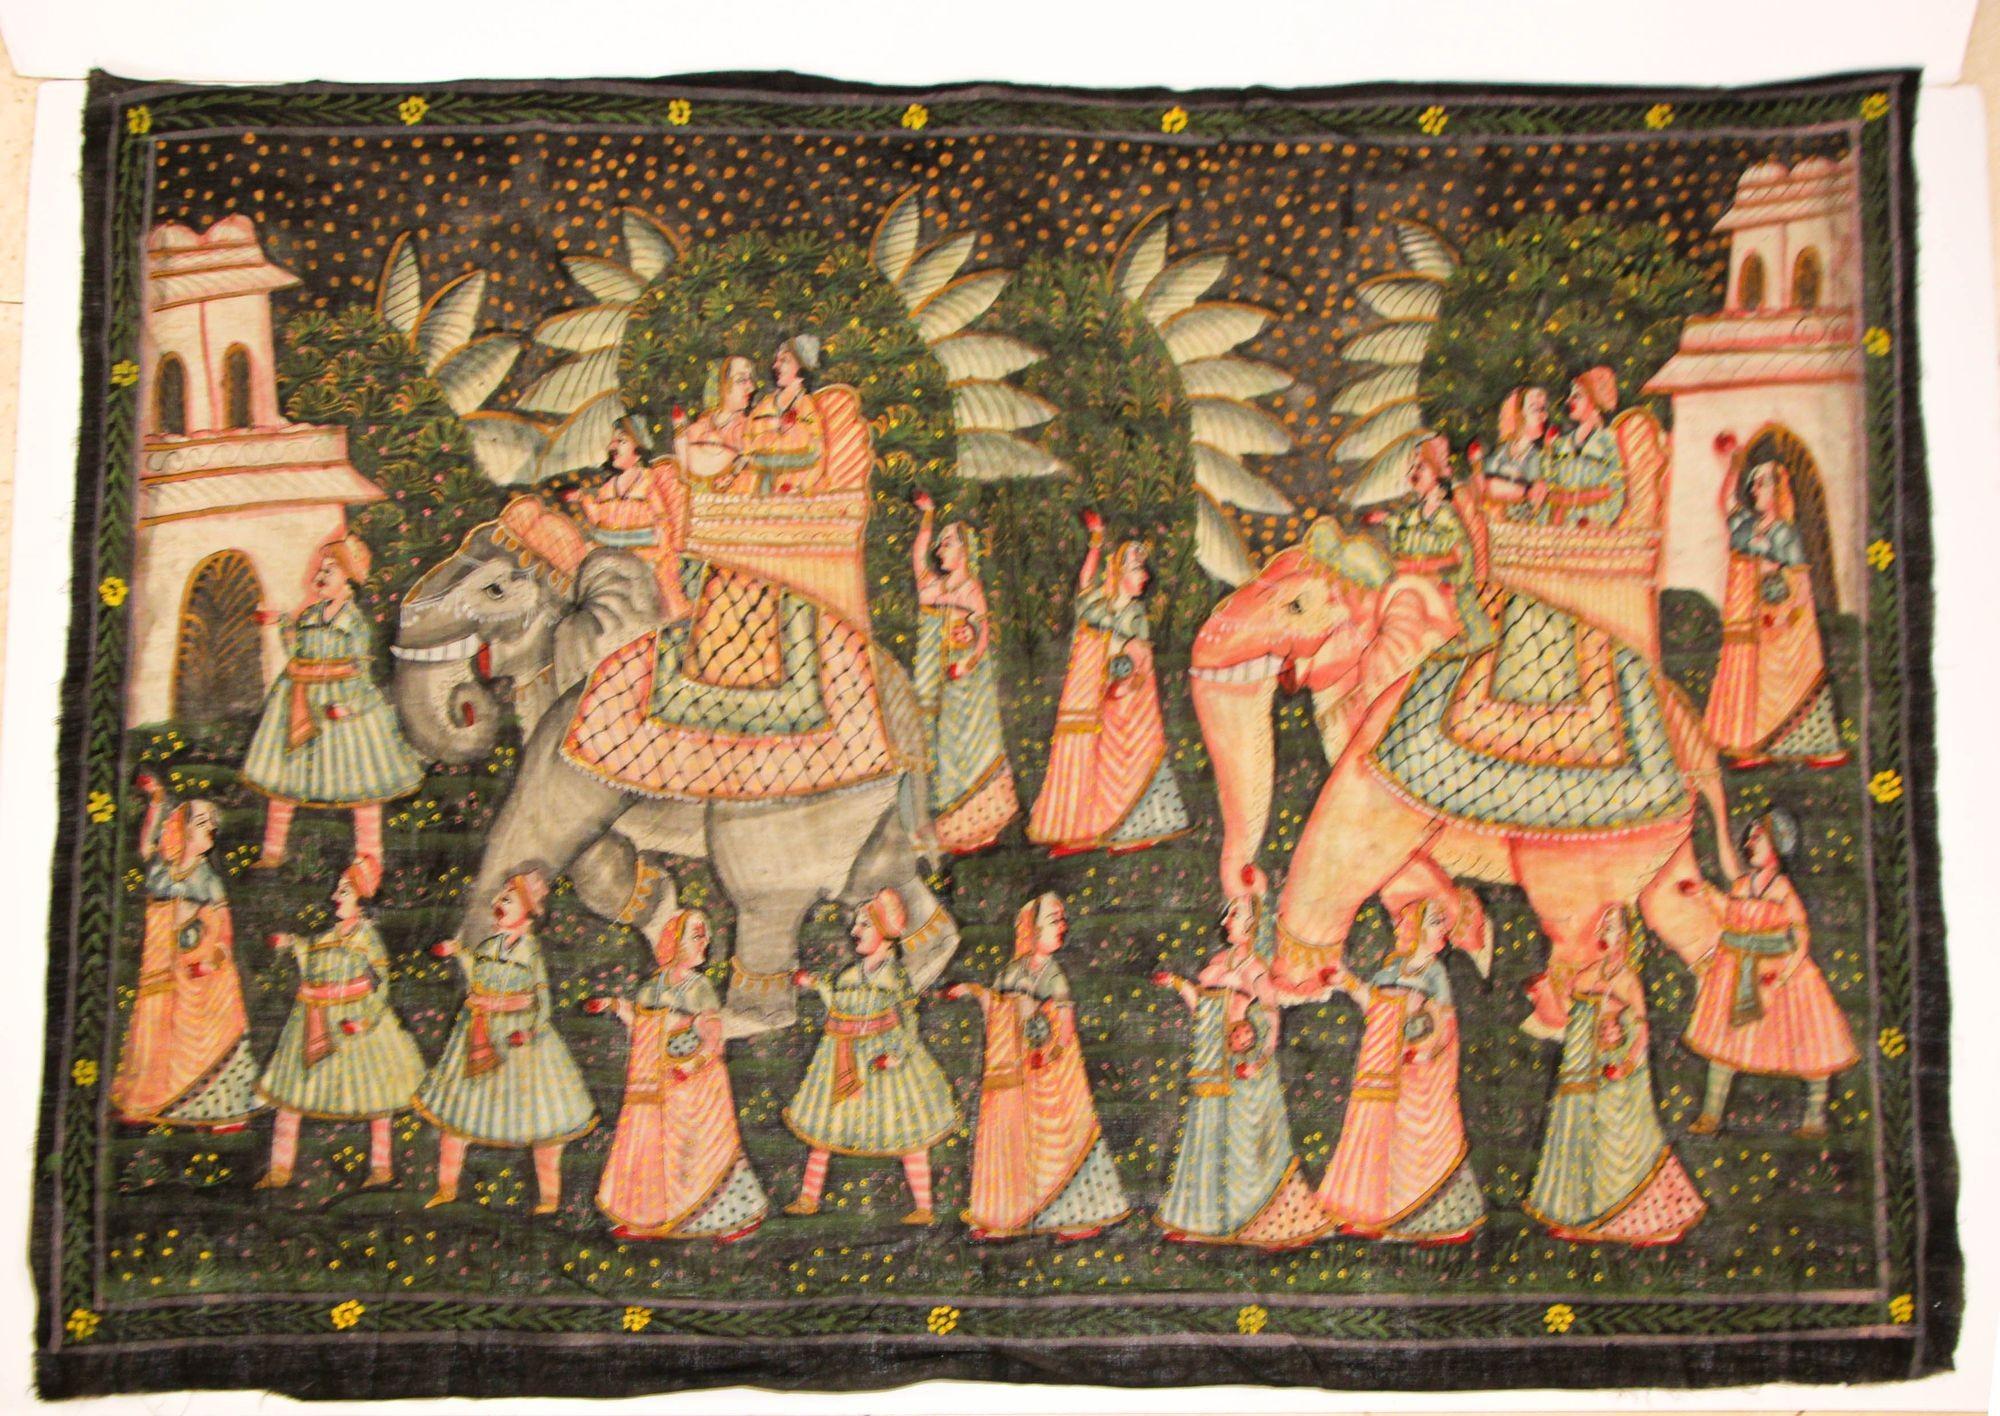 Large vintage Mughal silk painting of a Maharaja Royal Procession, two royal couples on elephant, probably a wedding procession with servant walking around them.
Mughal scene, hand painted on silk, very fine detailed and nice soft colors.
The